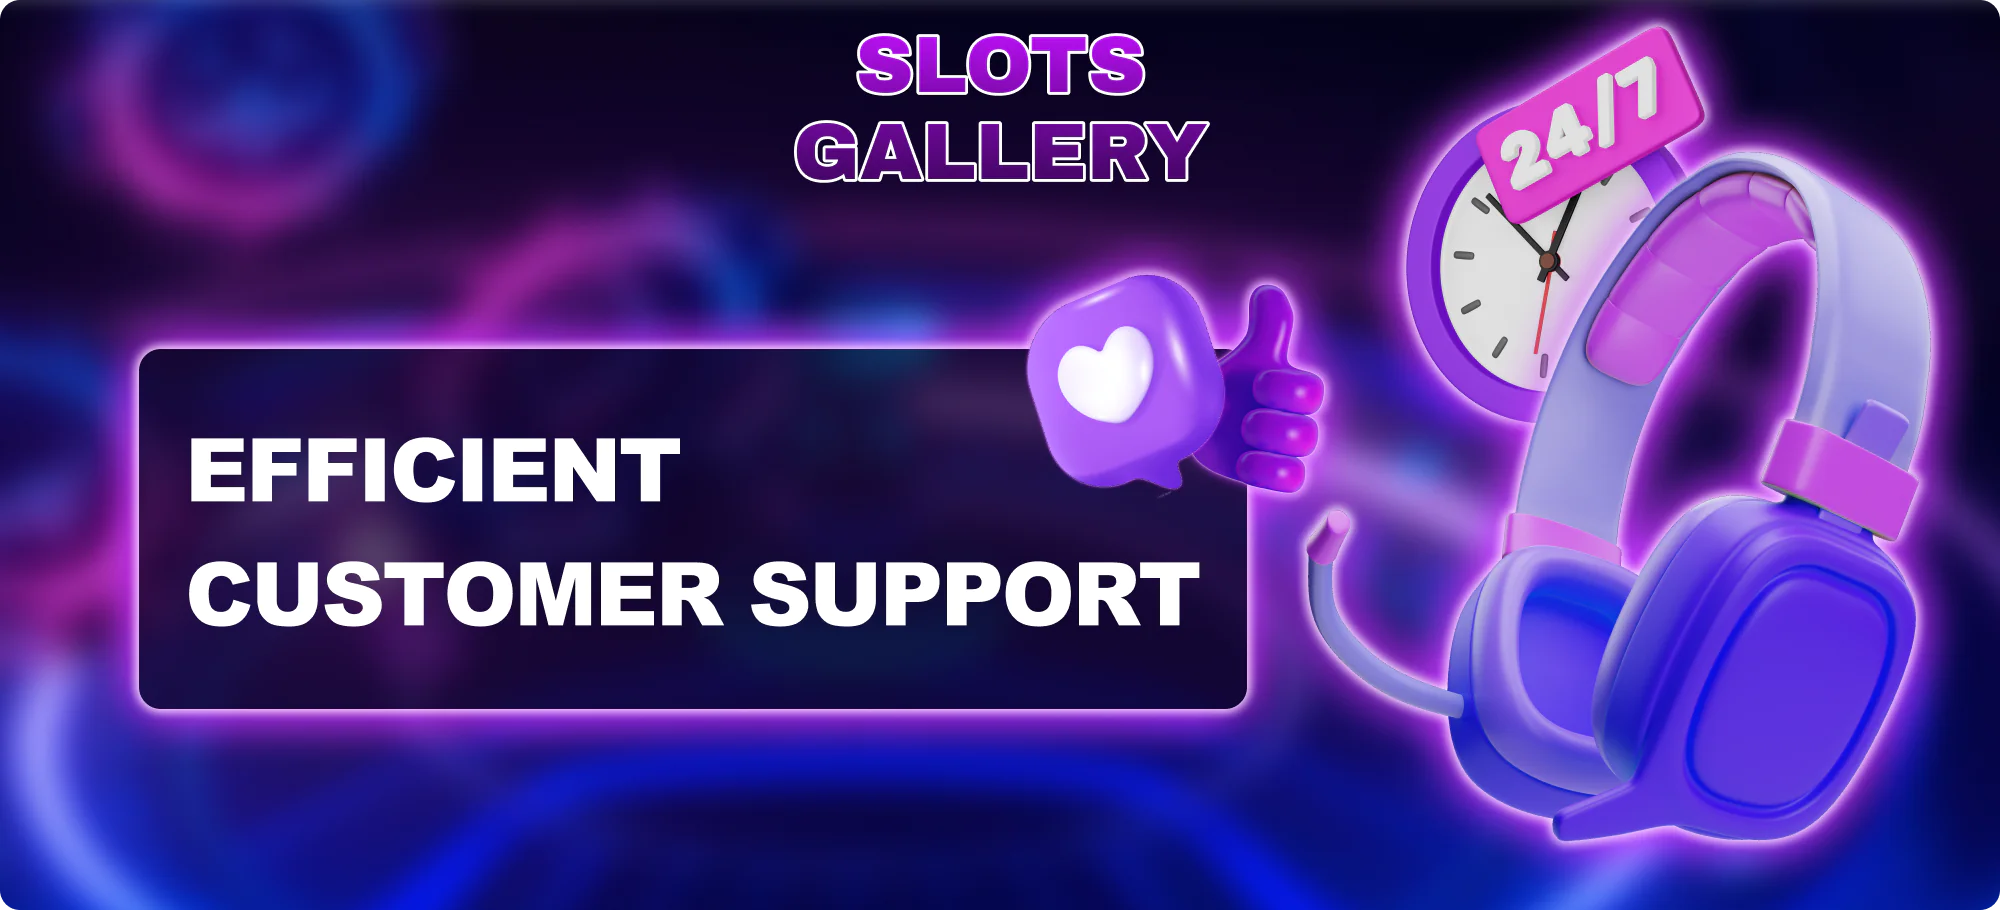 Effective customer support at the Slots Gallery for players